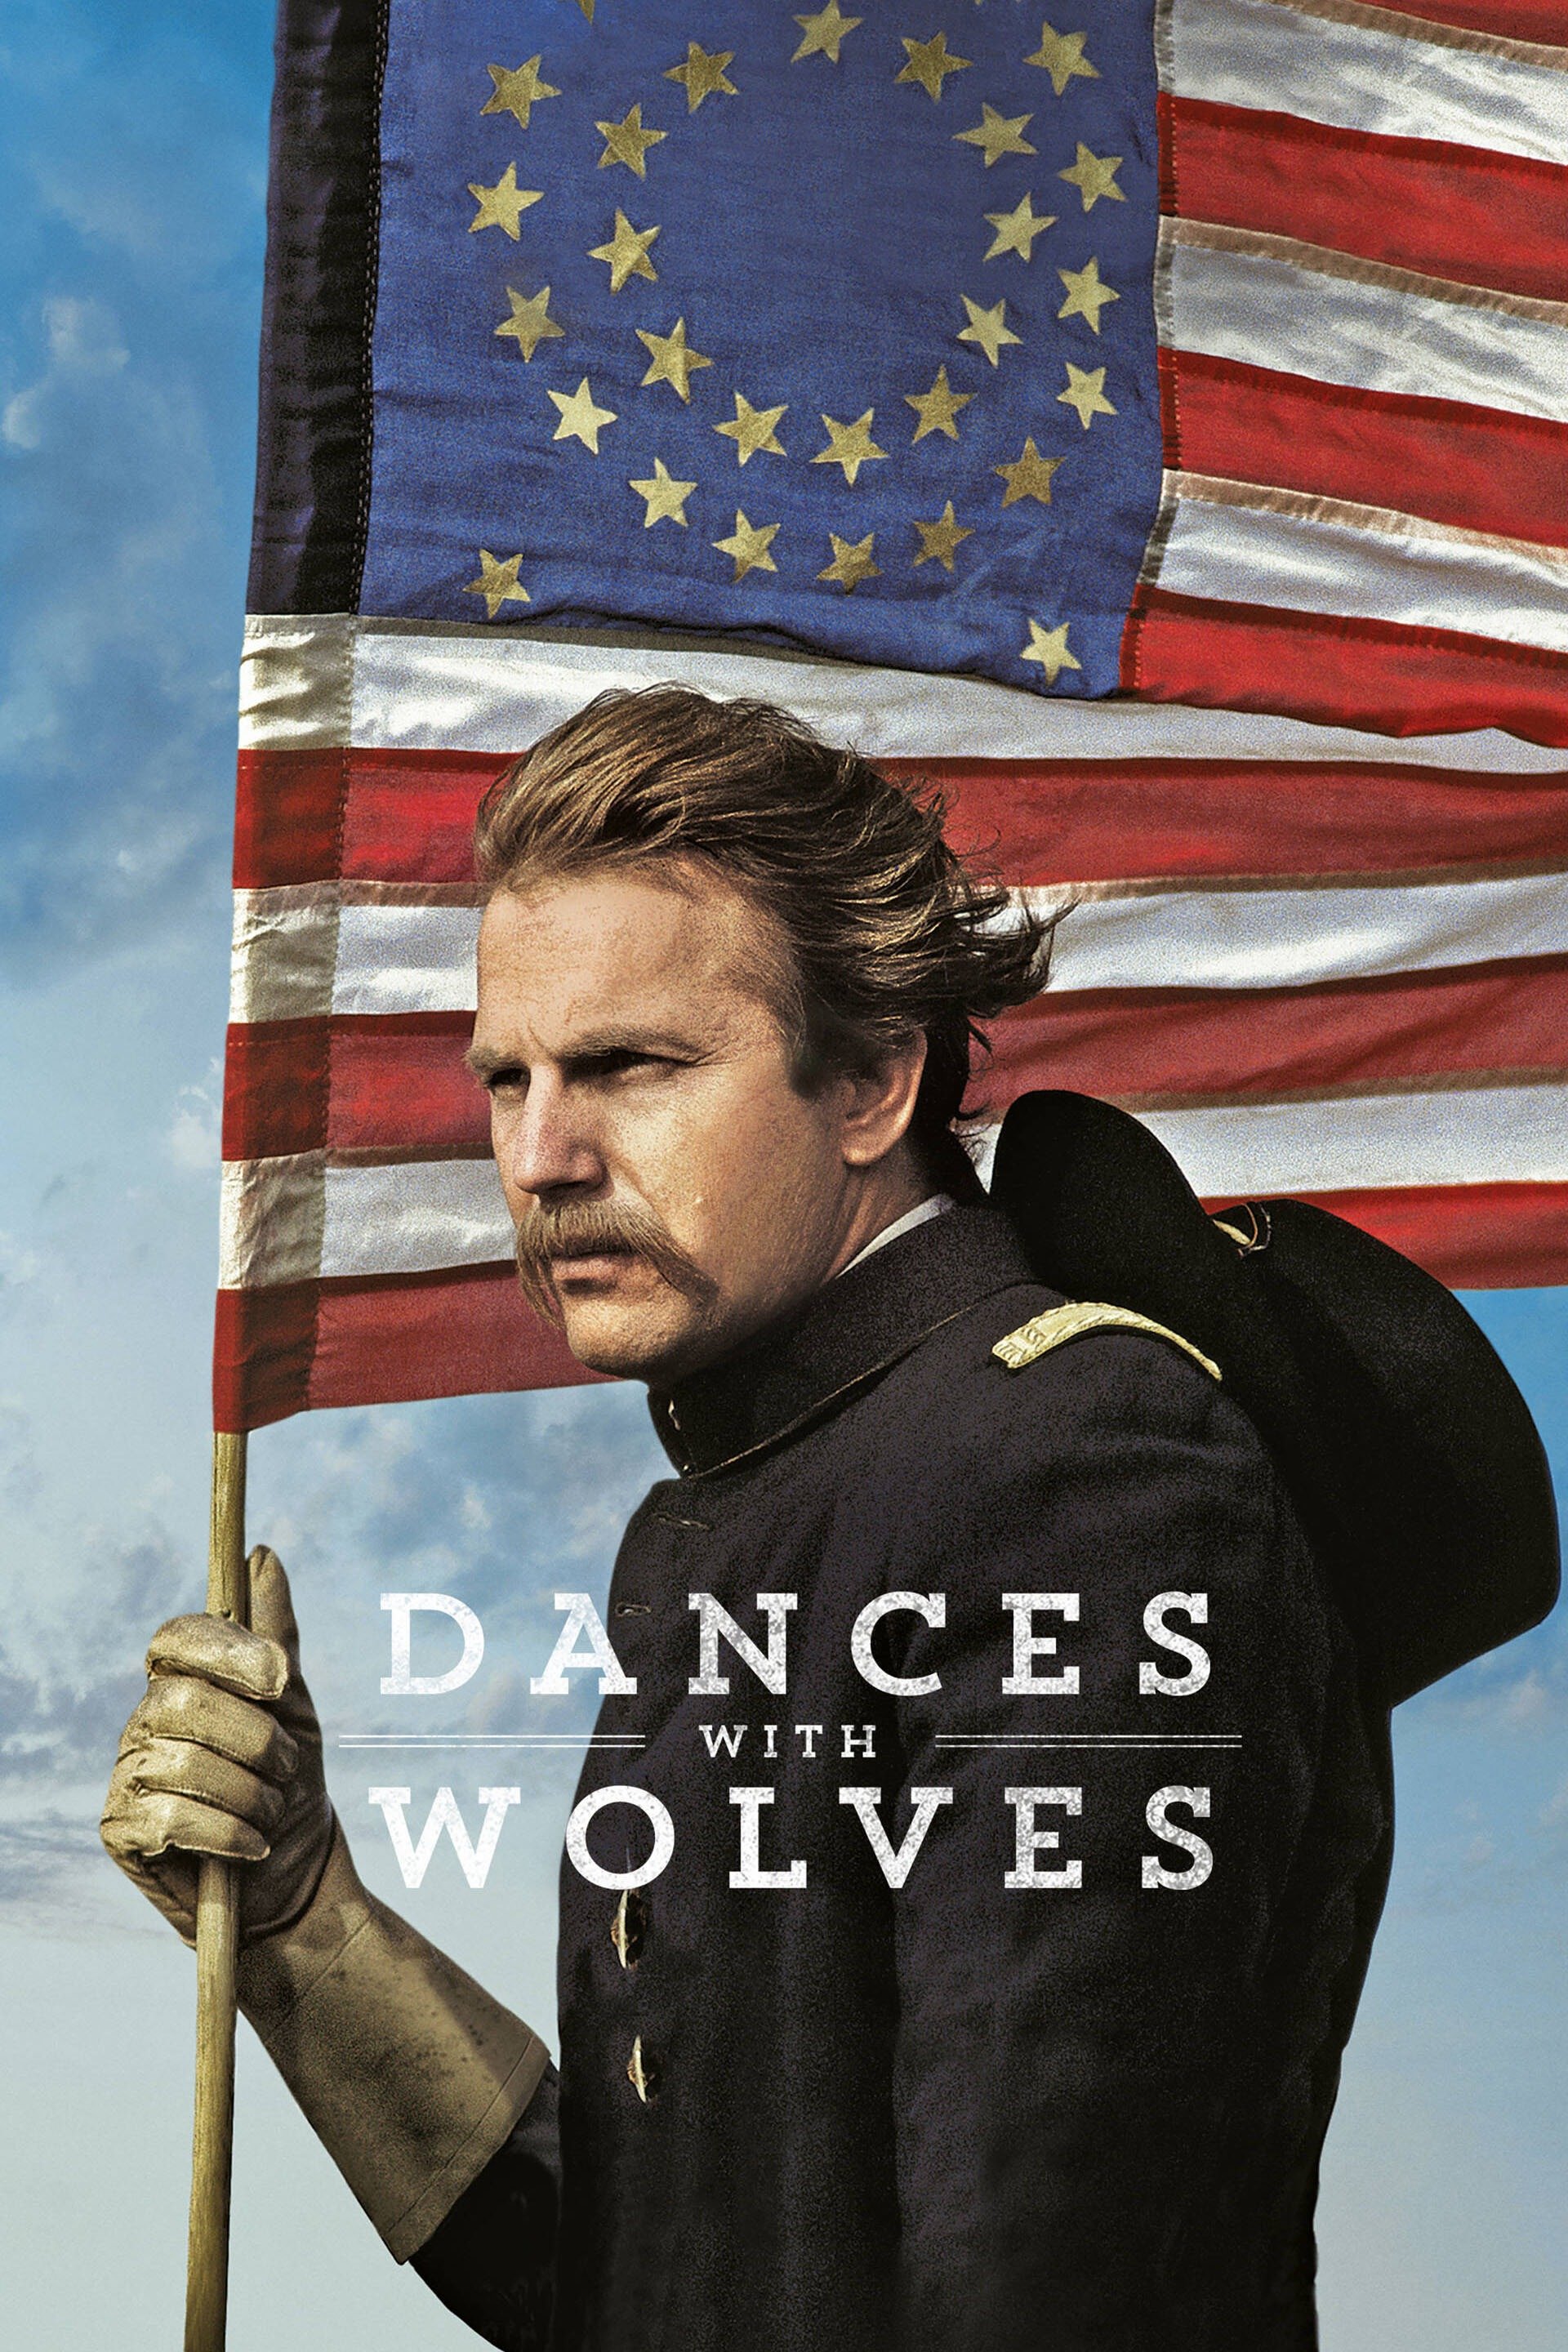 who played in dances with wolves